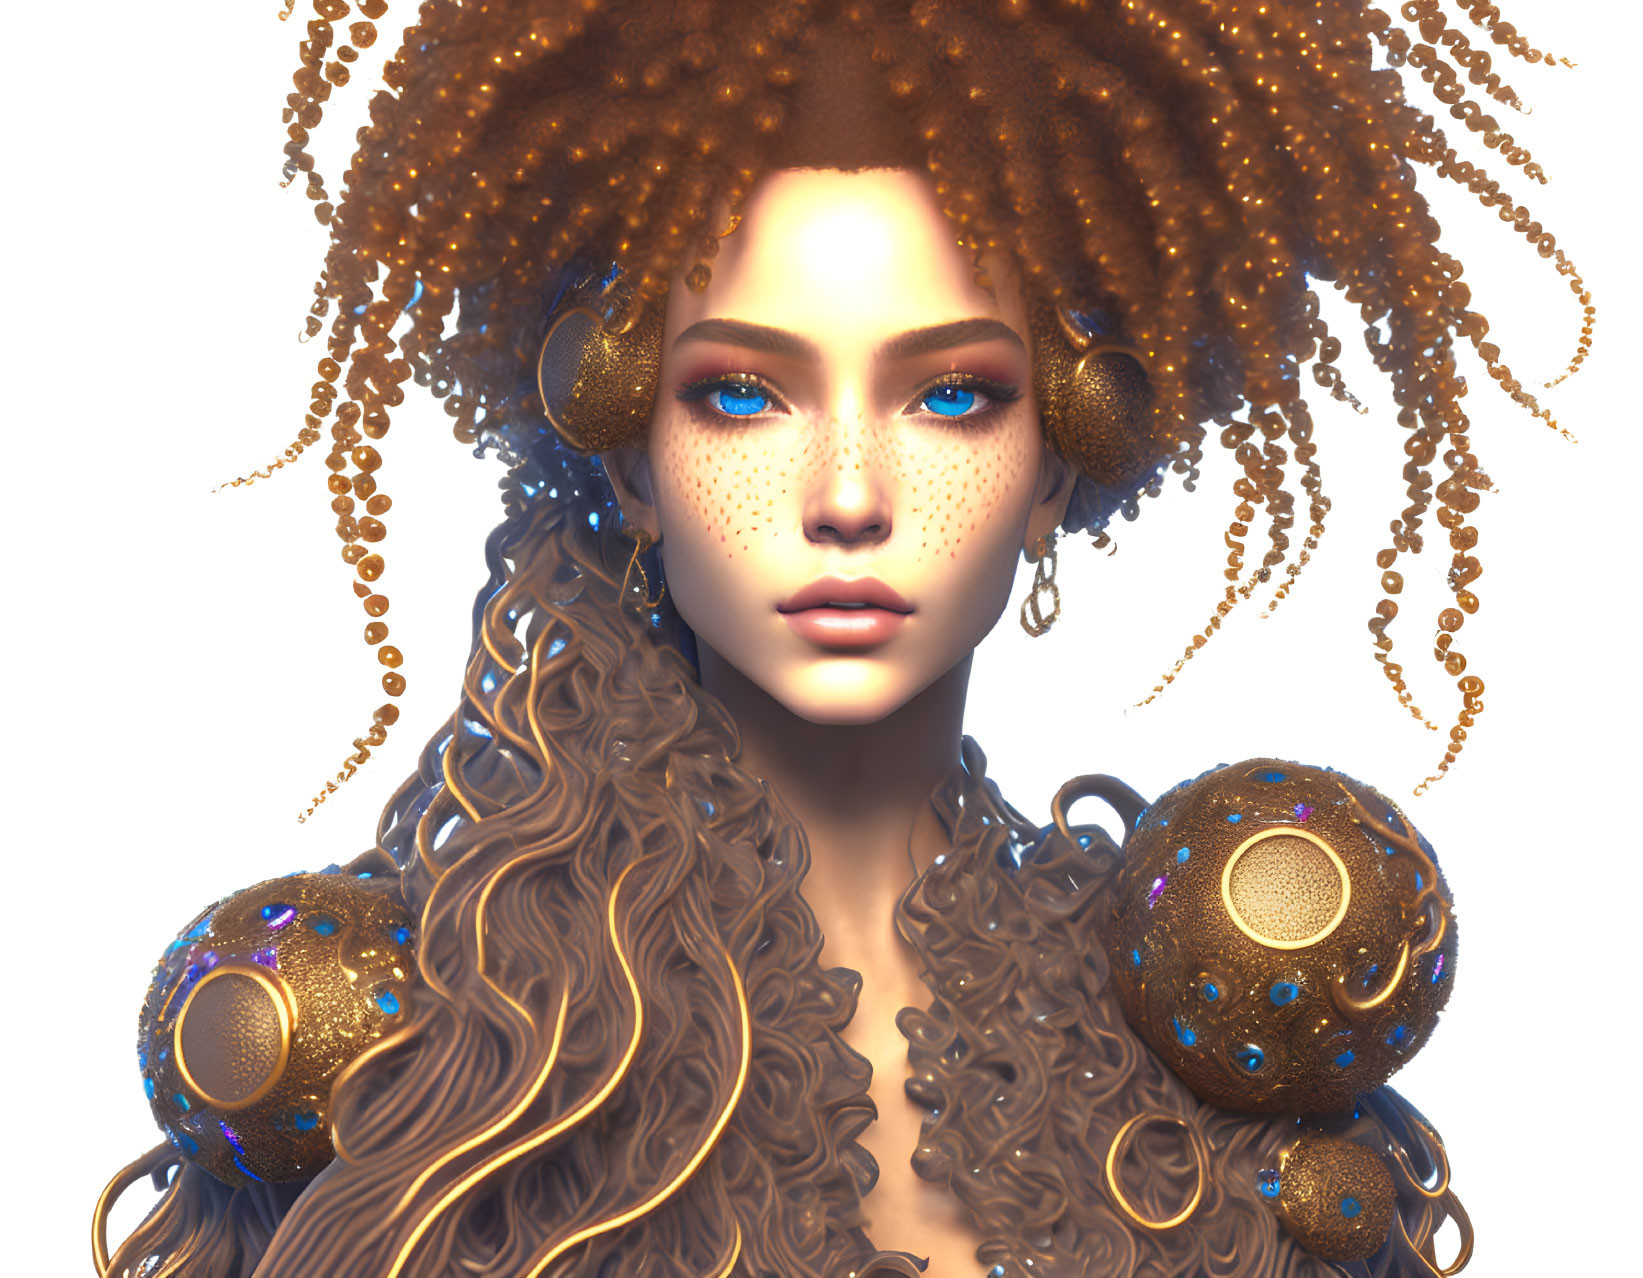 Digital artwork: Woman with curly hair, freckles, blue eyes & gold jewelry